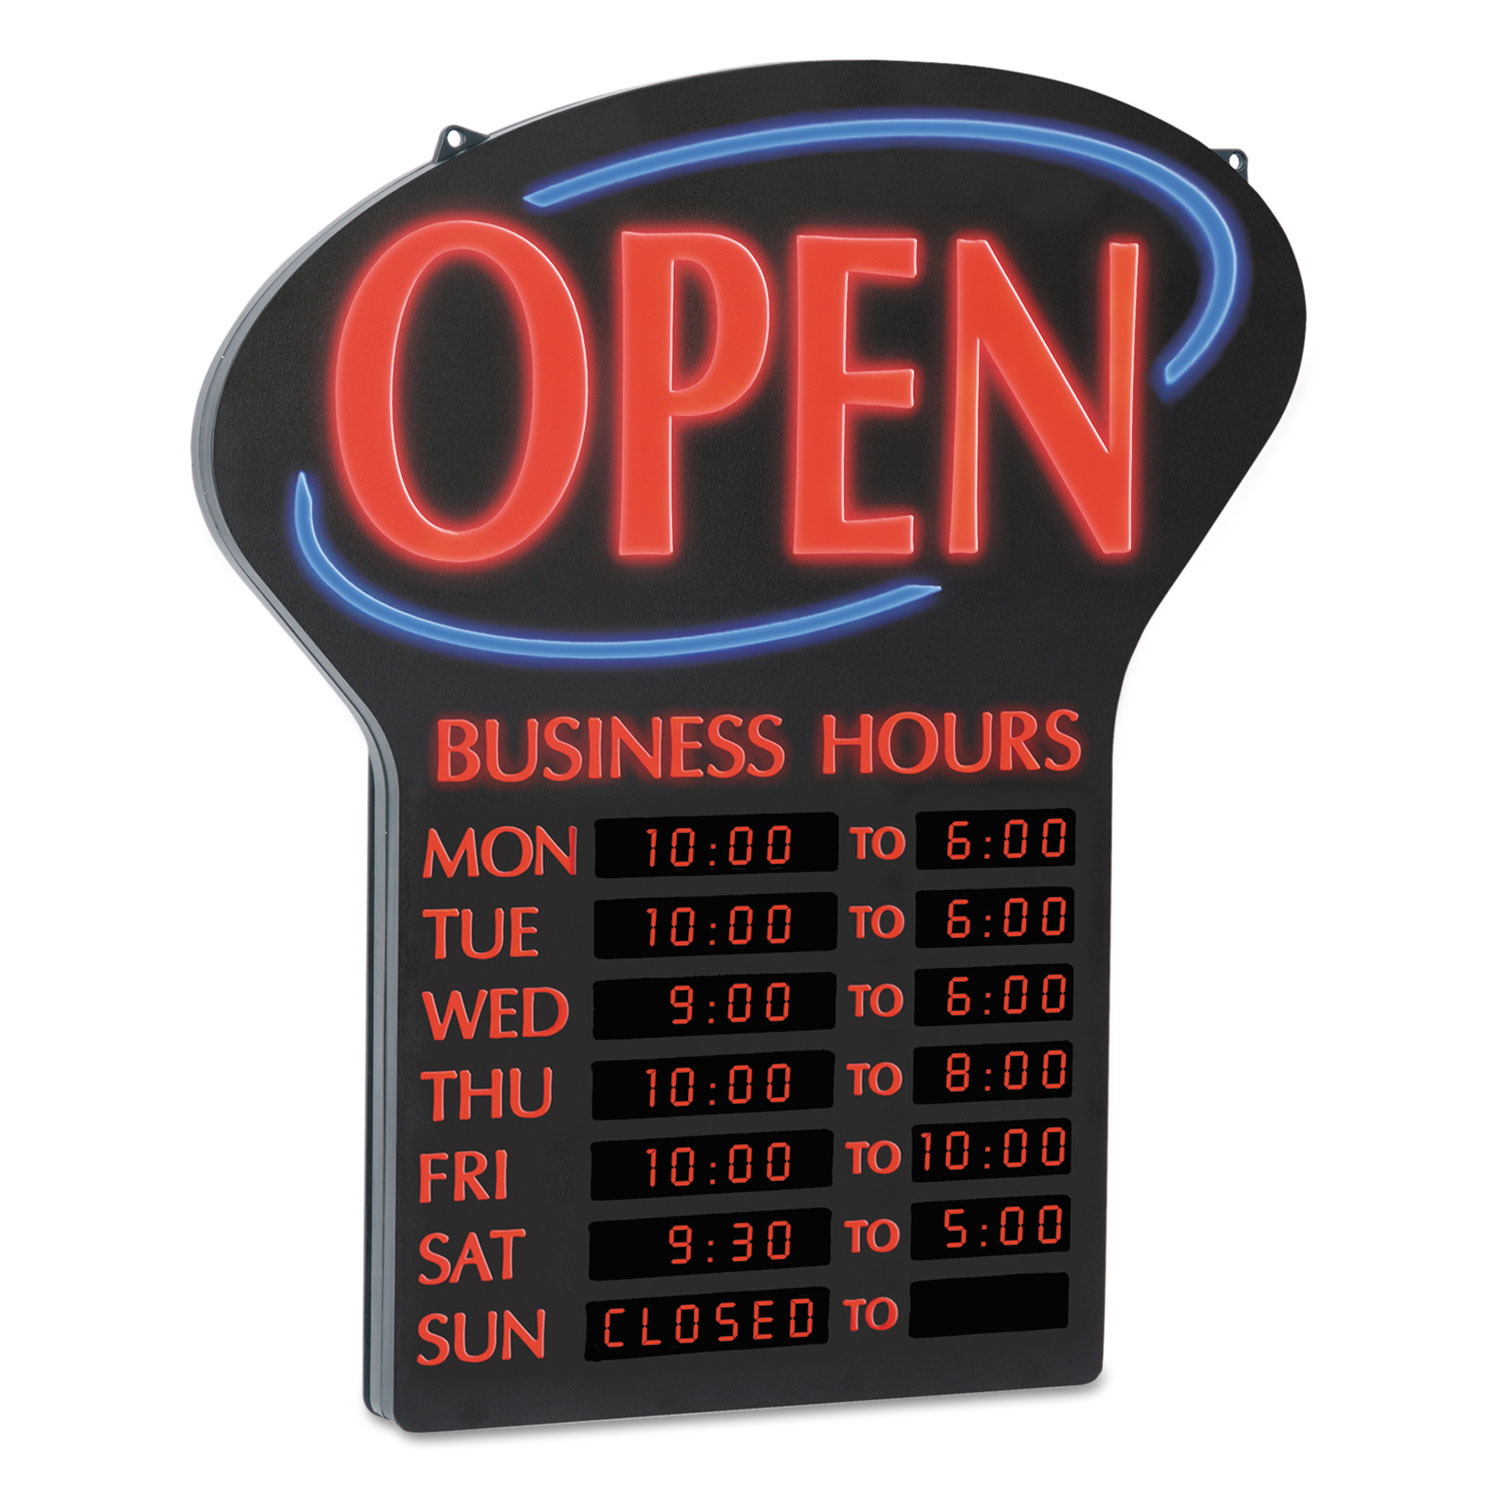  Newon 6093 LED Open Sign w/Digital Business Hours, 20 1/2 x 1 1/4 x 23 1/2, Black/Red/Blue (USS6093) 